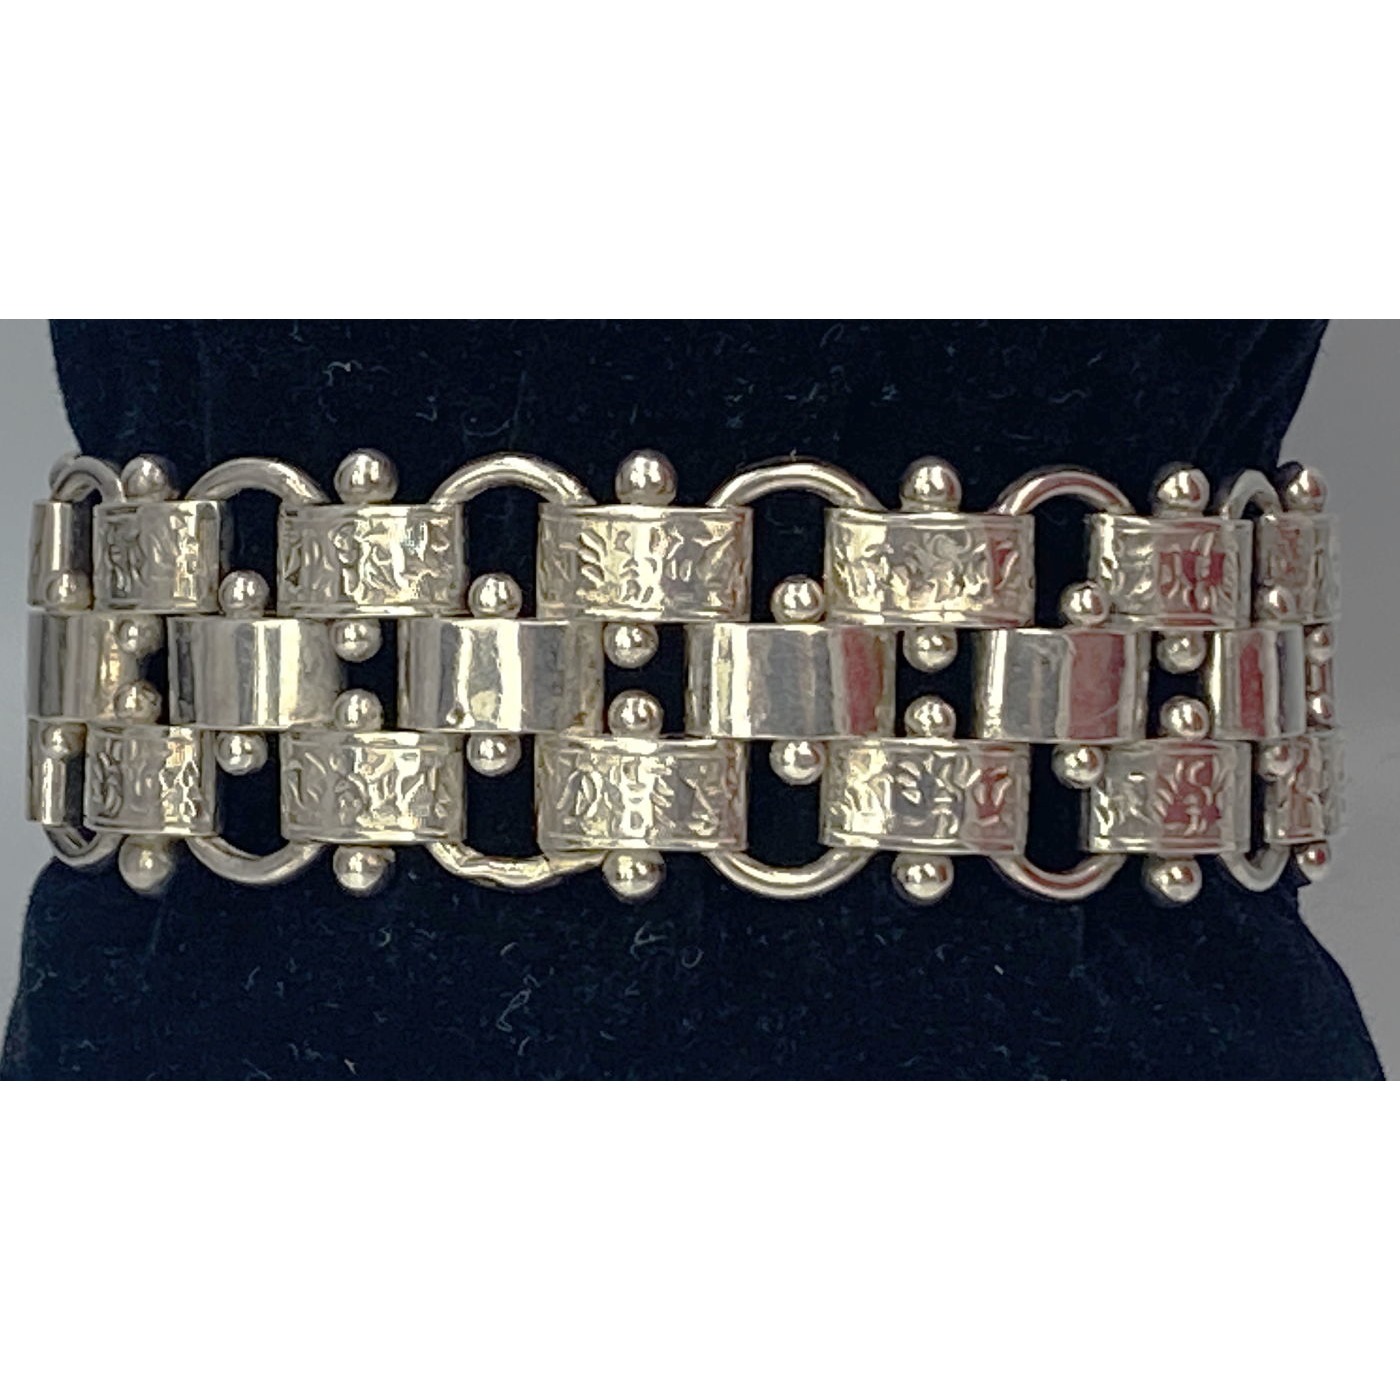 Incredible Ball and Embossed Link Basketweave Antique English Silver Bracelet